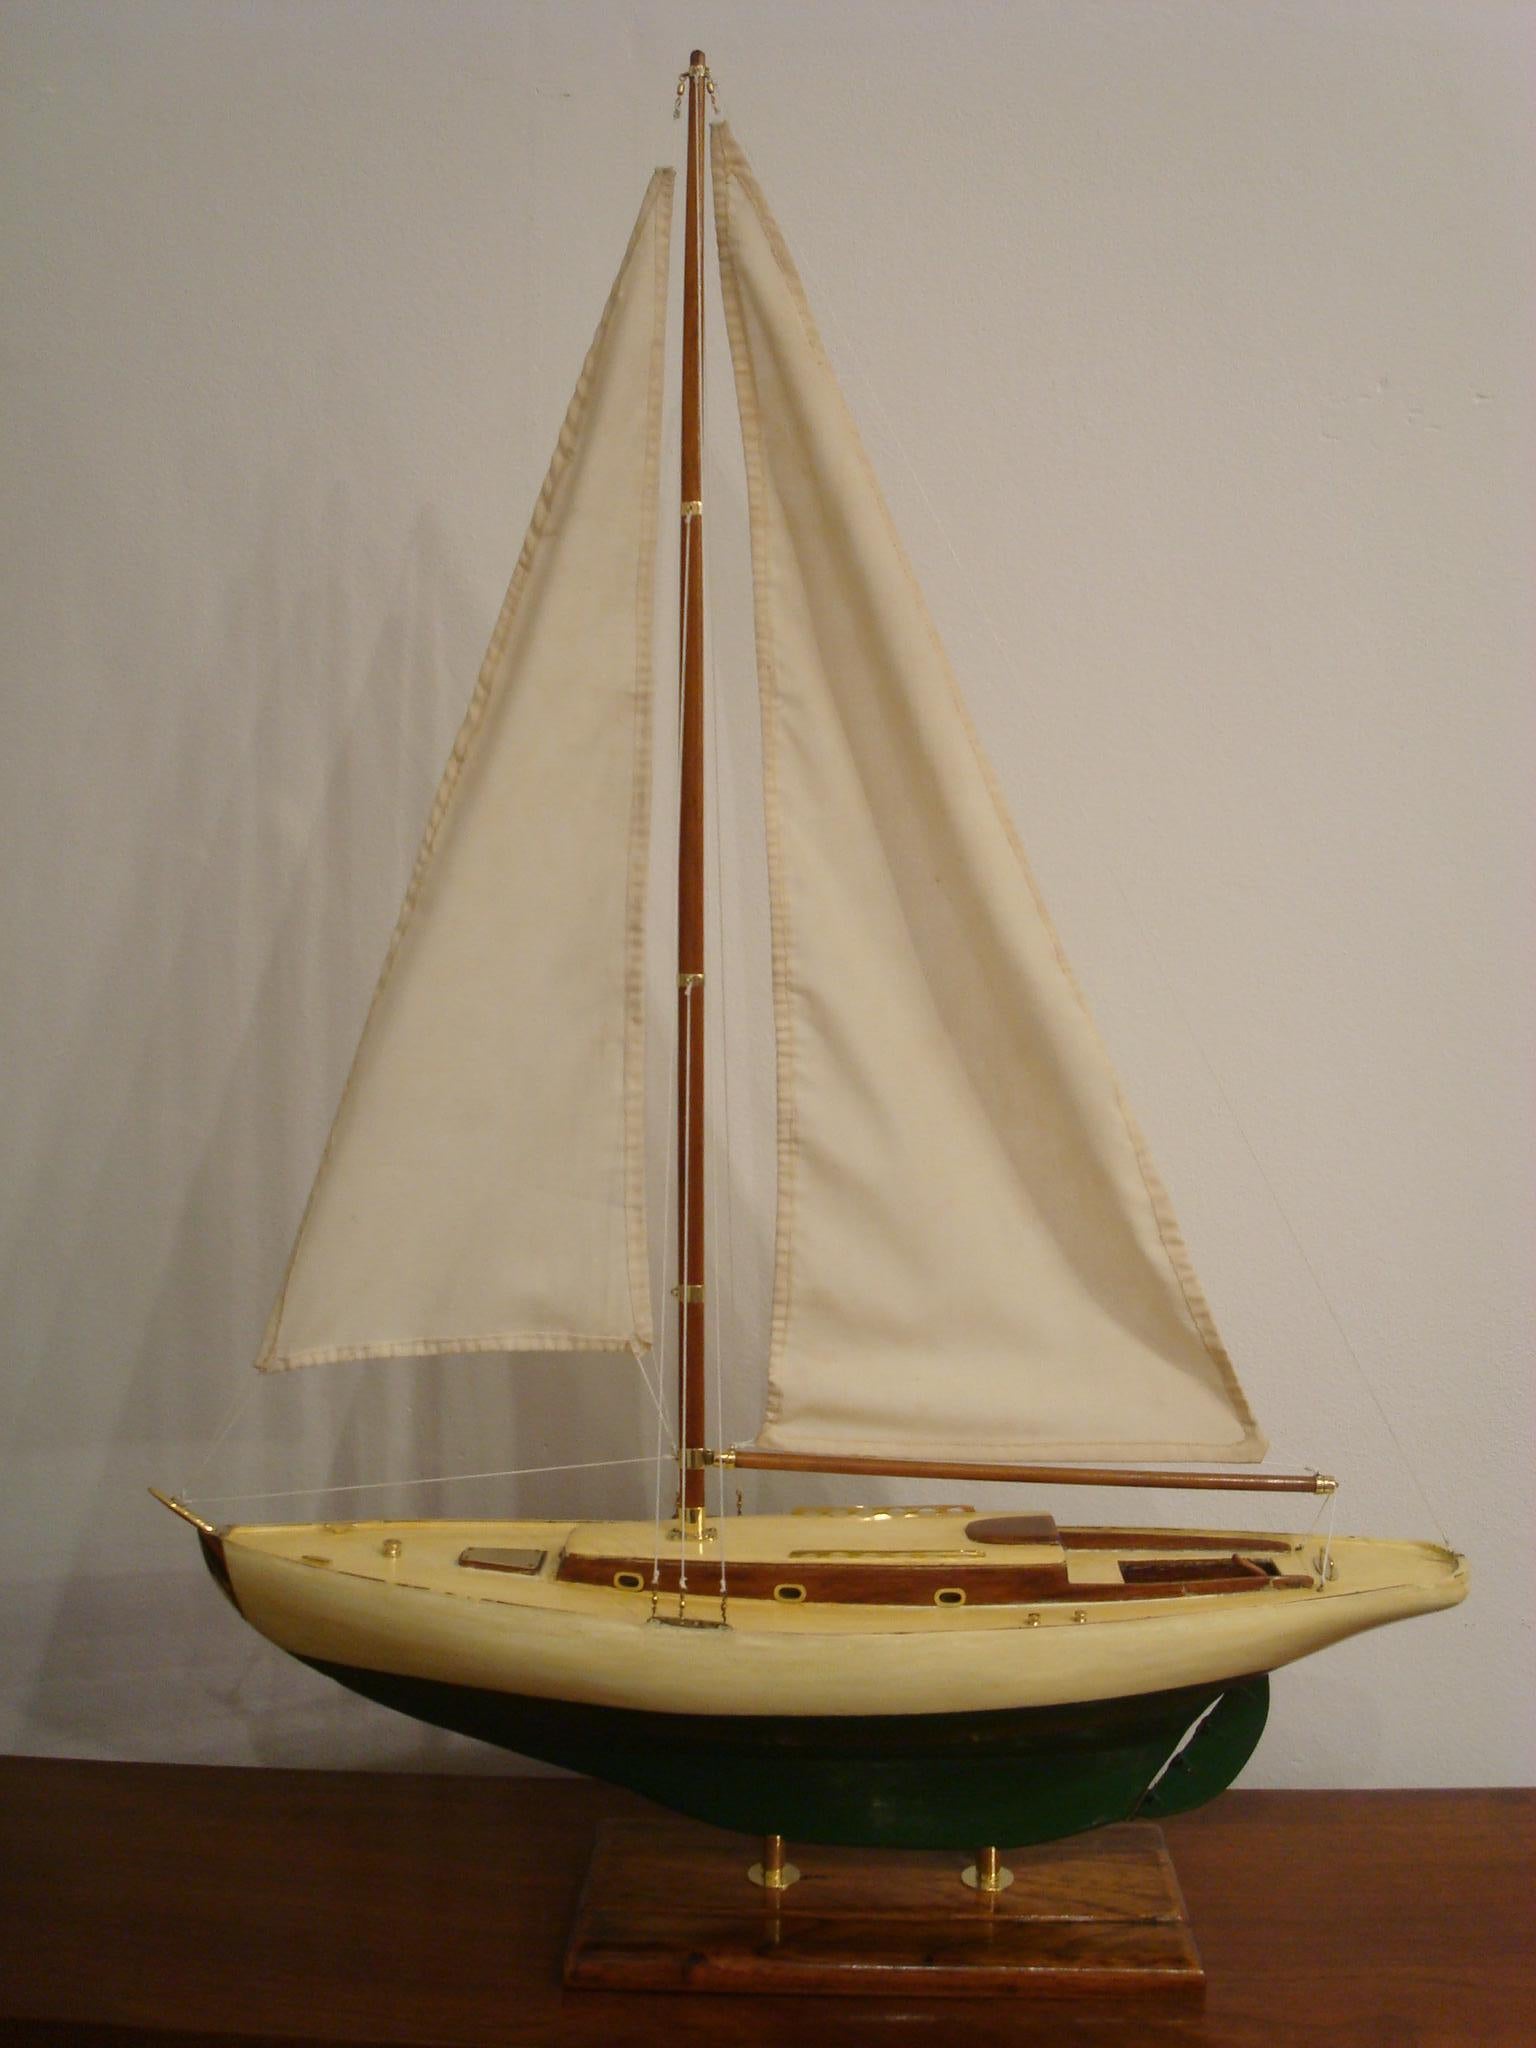 Sailboat model on stand. Painted wood body and bronze accessories.
Made between 1920s-1930s. Very nice restored conditions.
Very decorative item, perfect for any nautical fan.

               